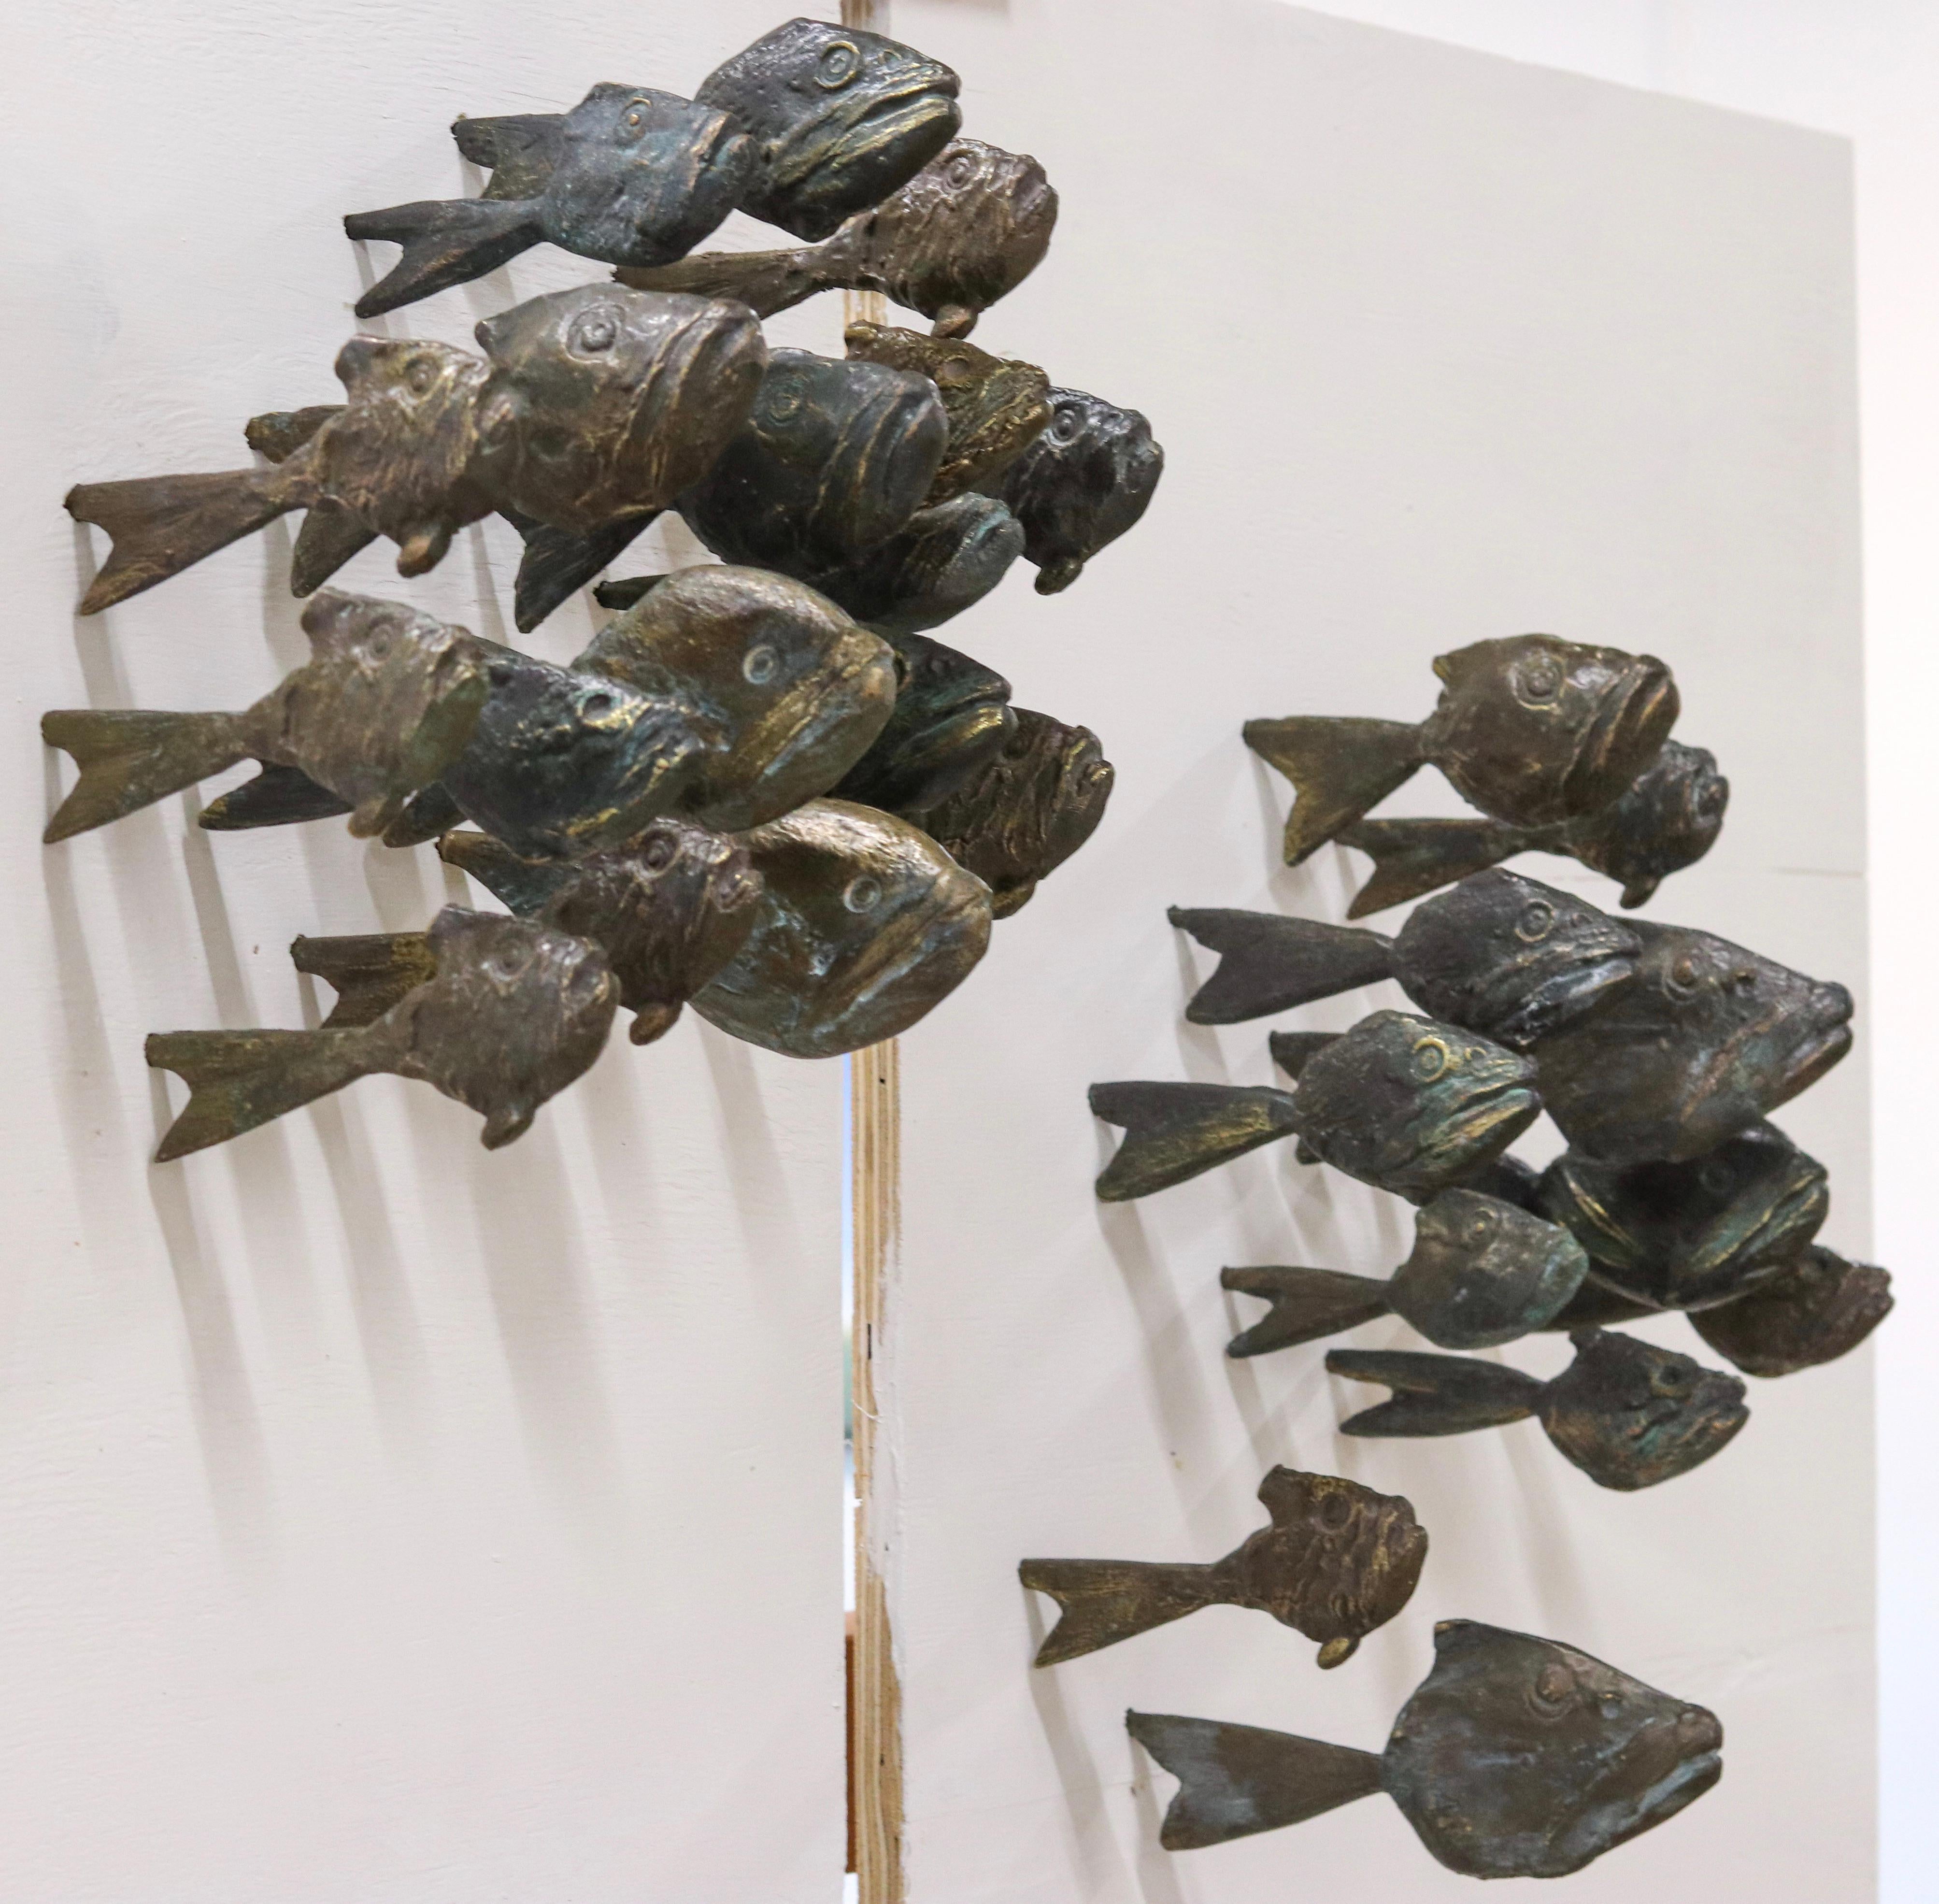 Piranha's  - 21st Century Bronze Sculpture out of Piranha's  (45 fishes) - Gold Abstract Sculpture by Yrgos Kypris